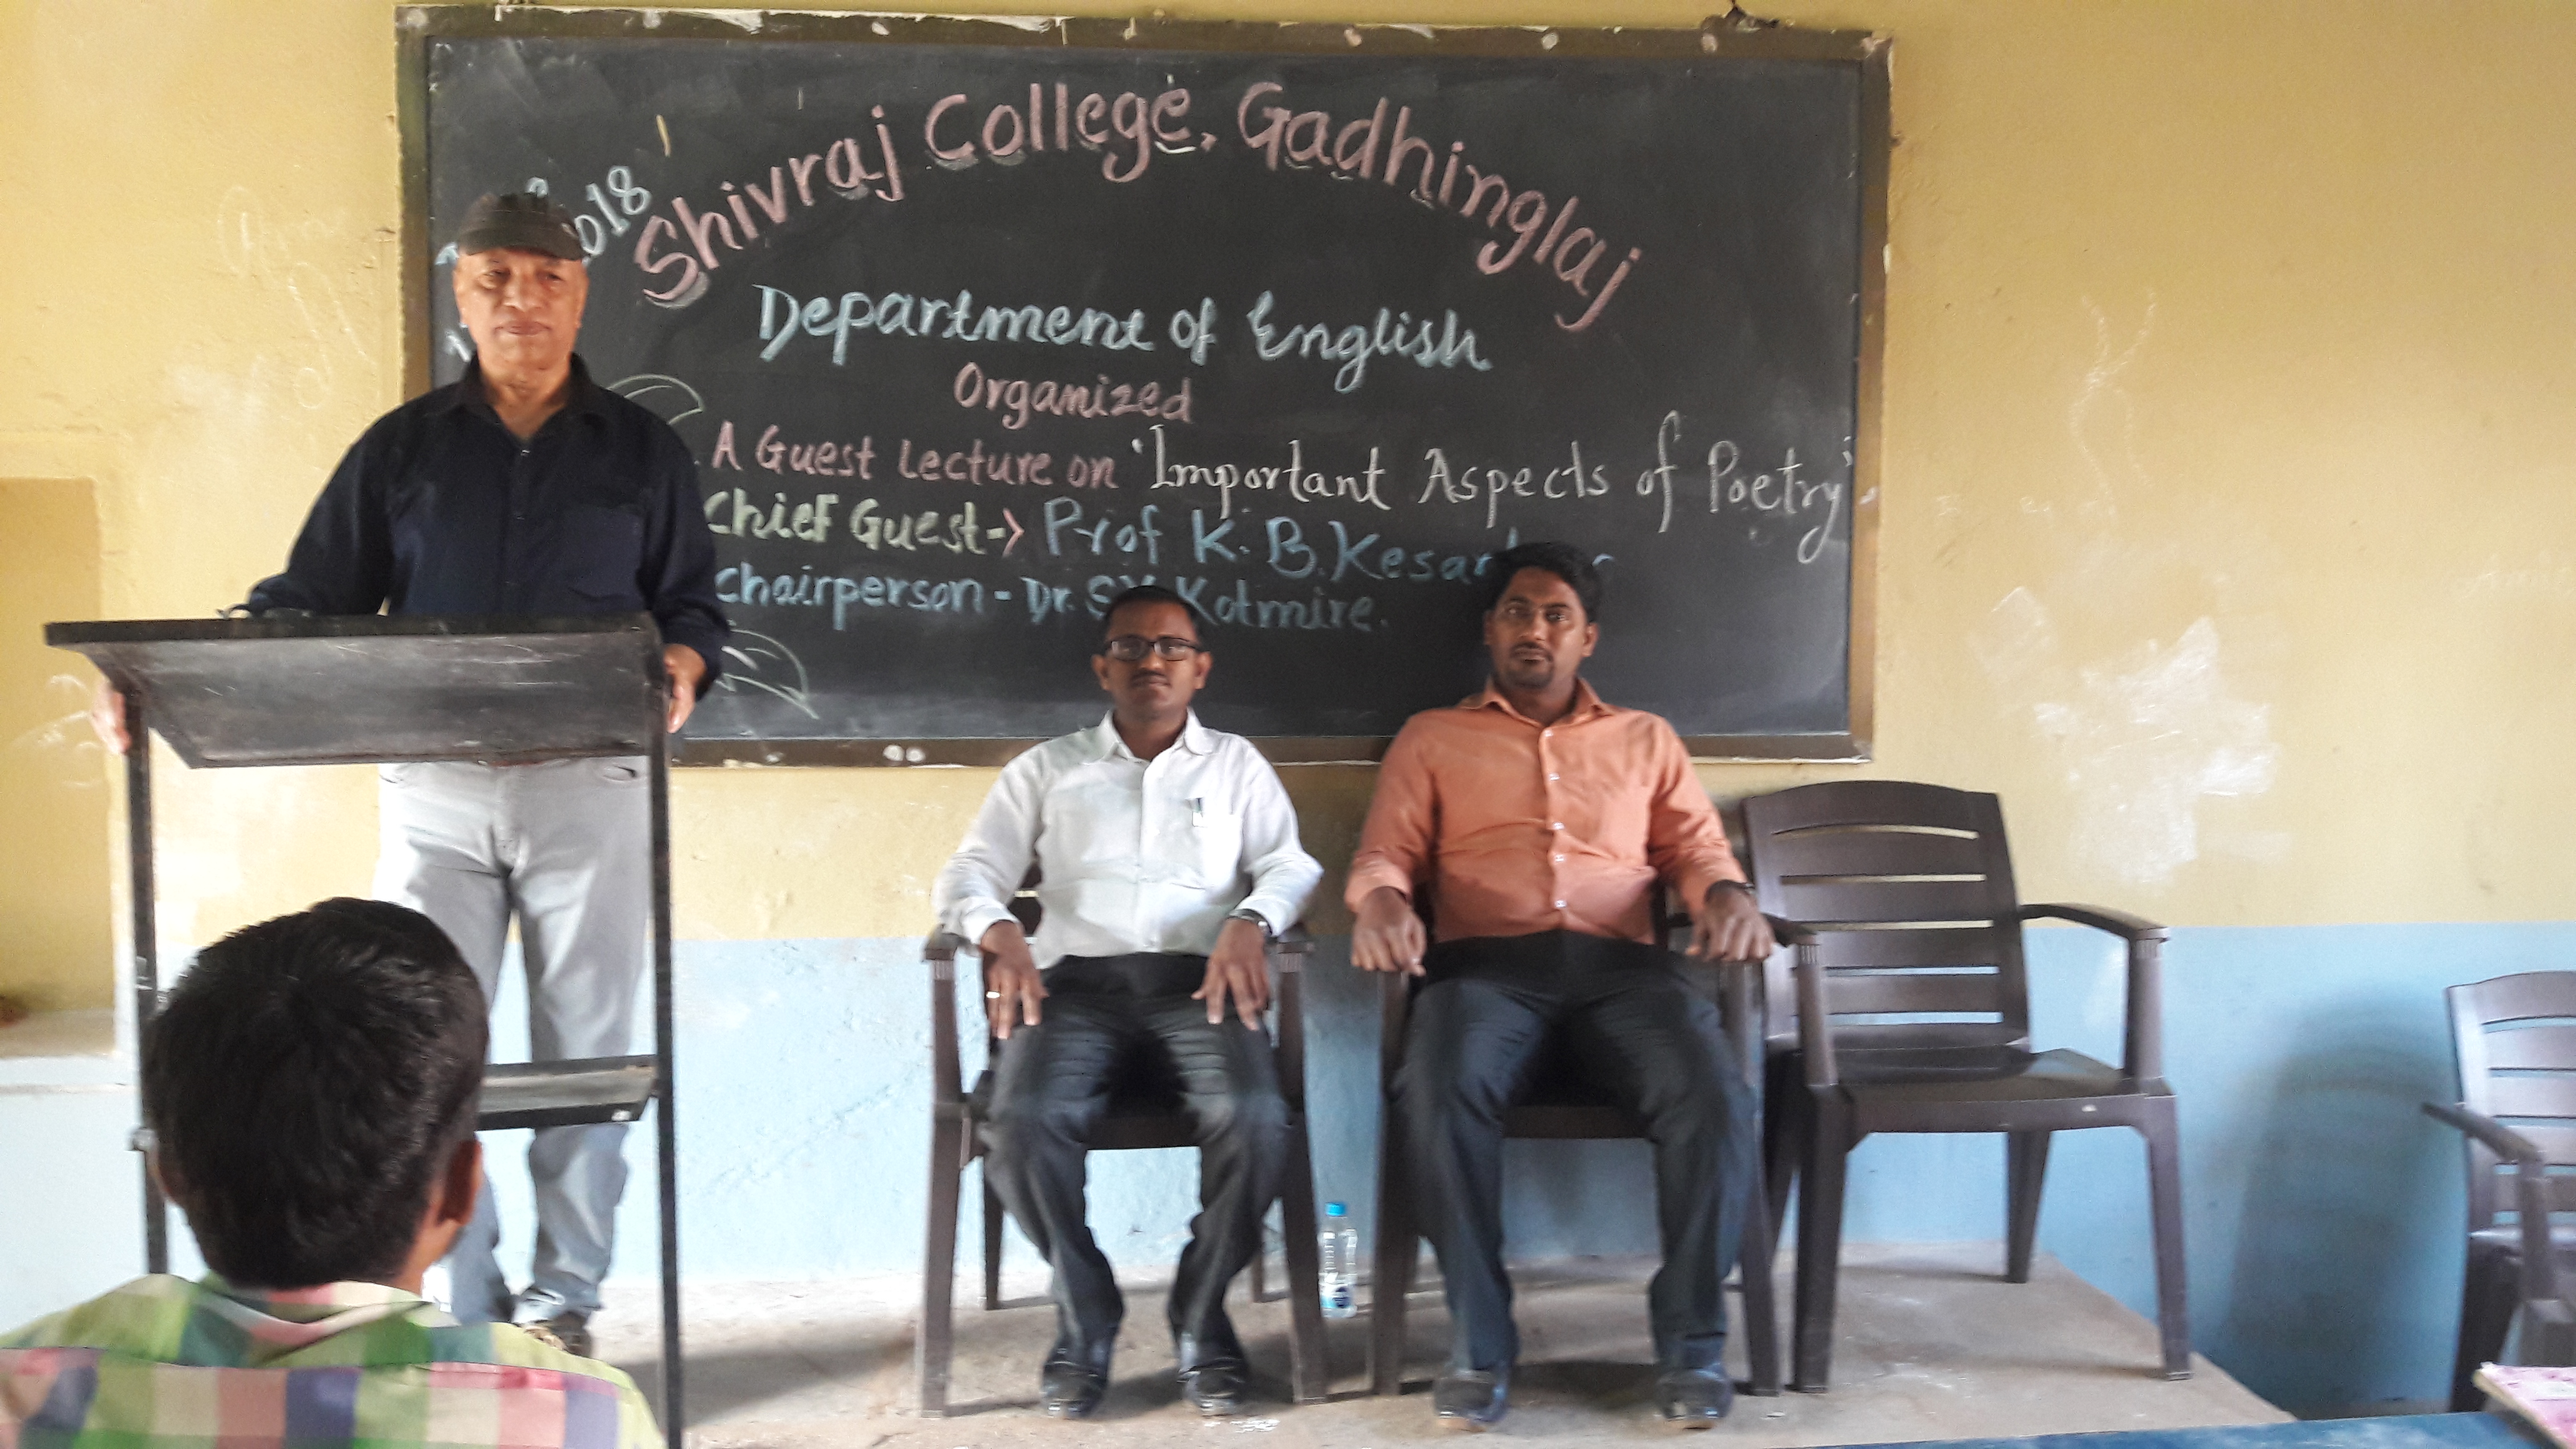 A Guest Lecture on 'Important Aspects of poetry'